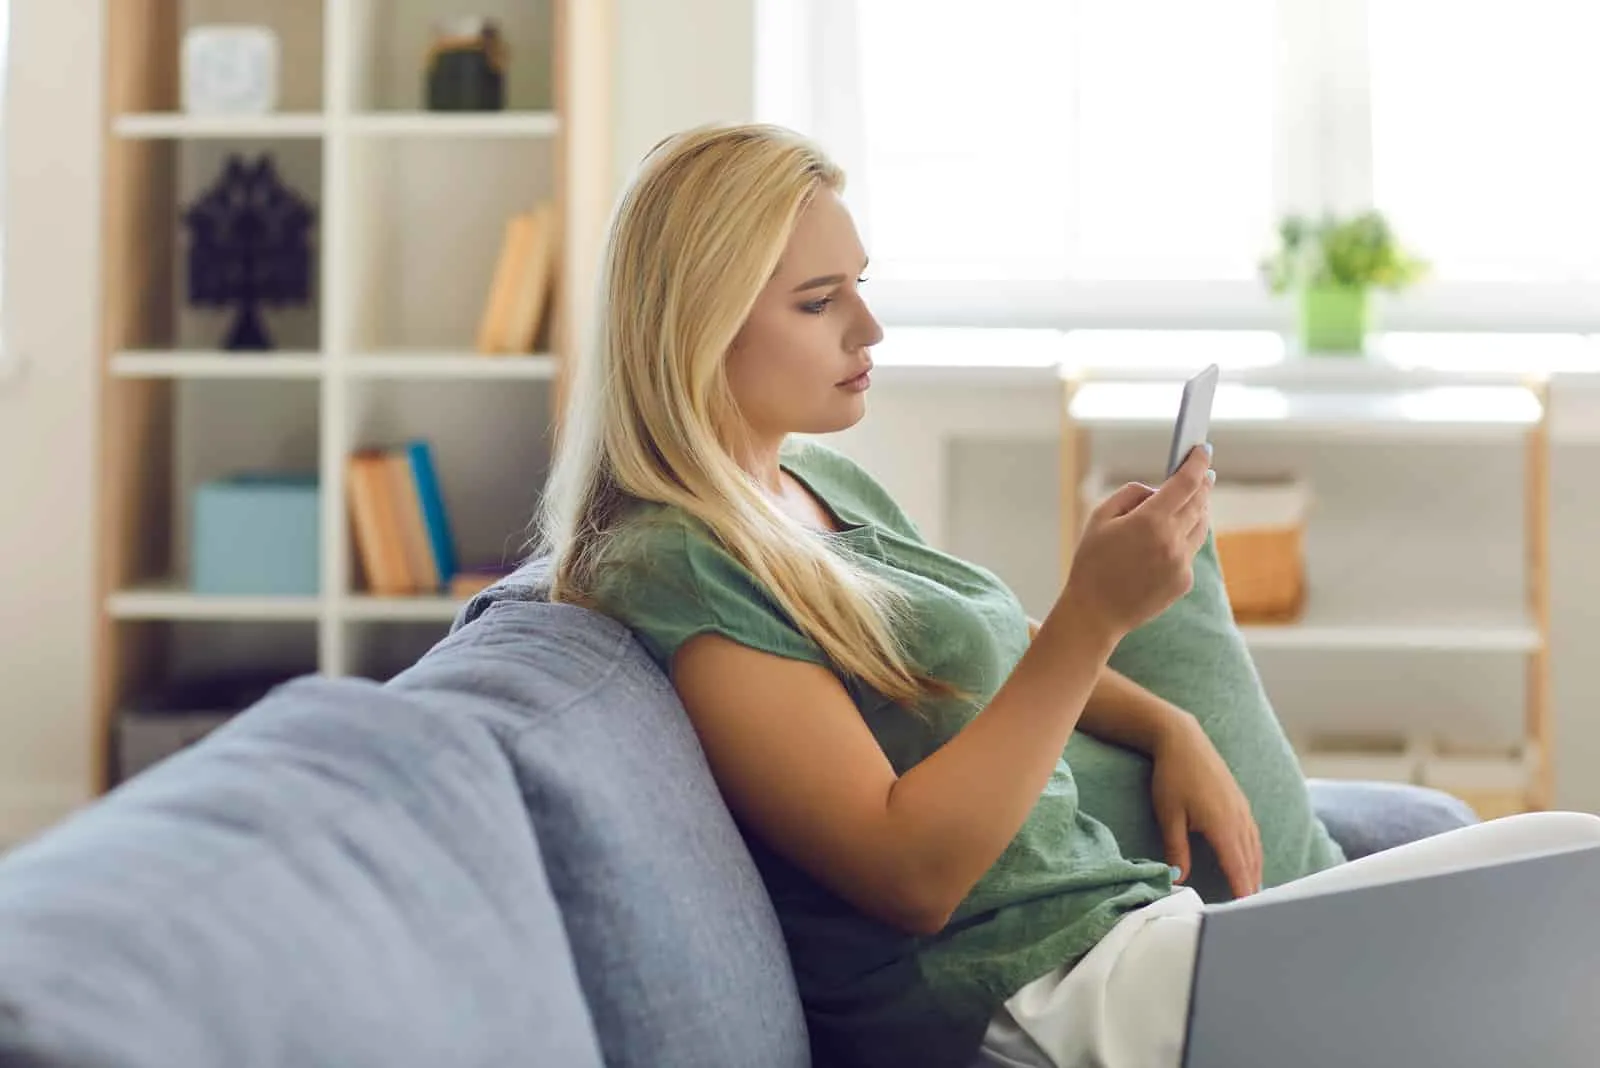 a beautiful woman with long blonde hair is sitting on the couch holding a phone in her hand